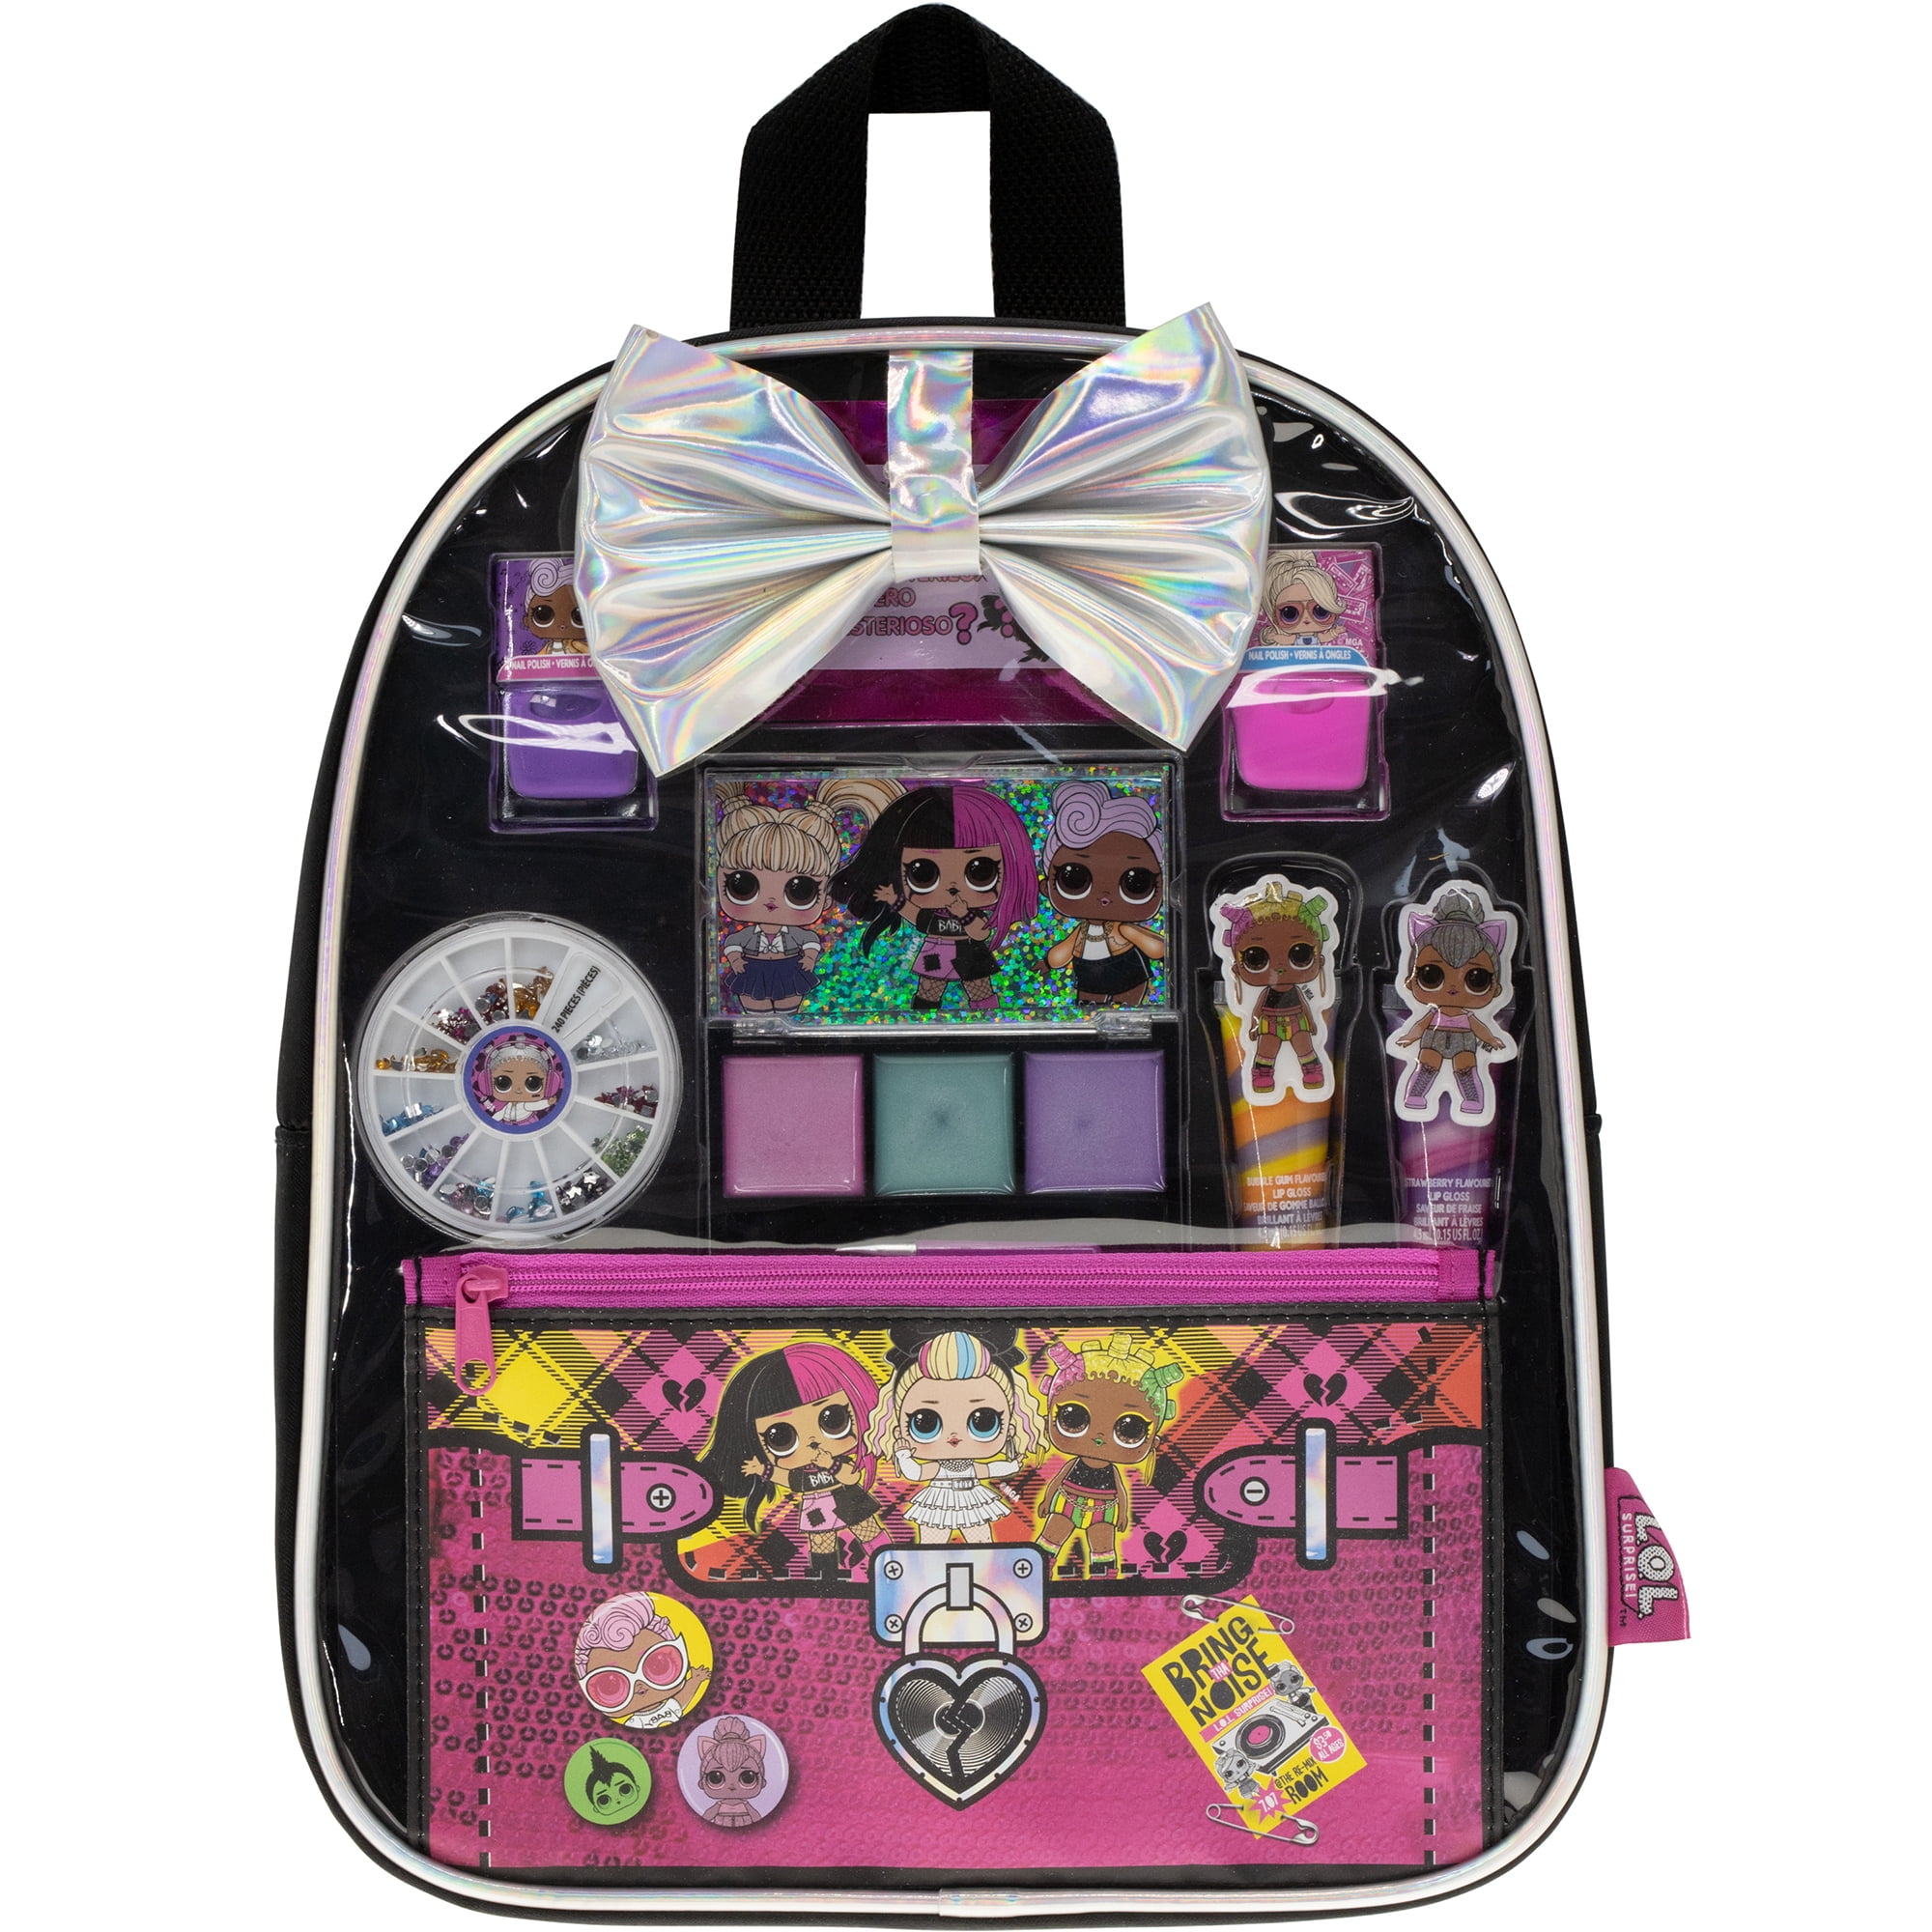 L.O.L Surprise! Townley Girl Backpack Beauty Cosmetic Make-up Set, Pretend Play Toy and Gift for Girls Ages 5+, 11 - Walmart.com